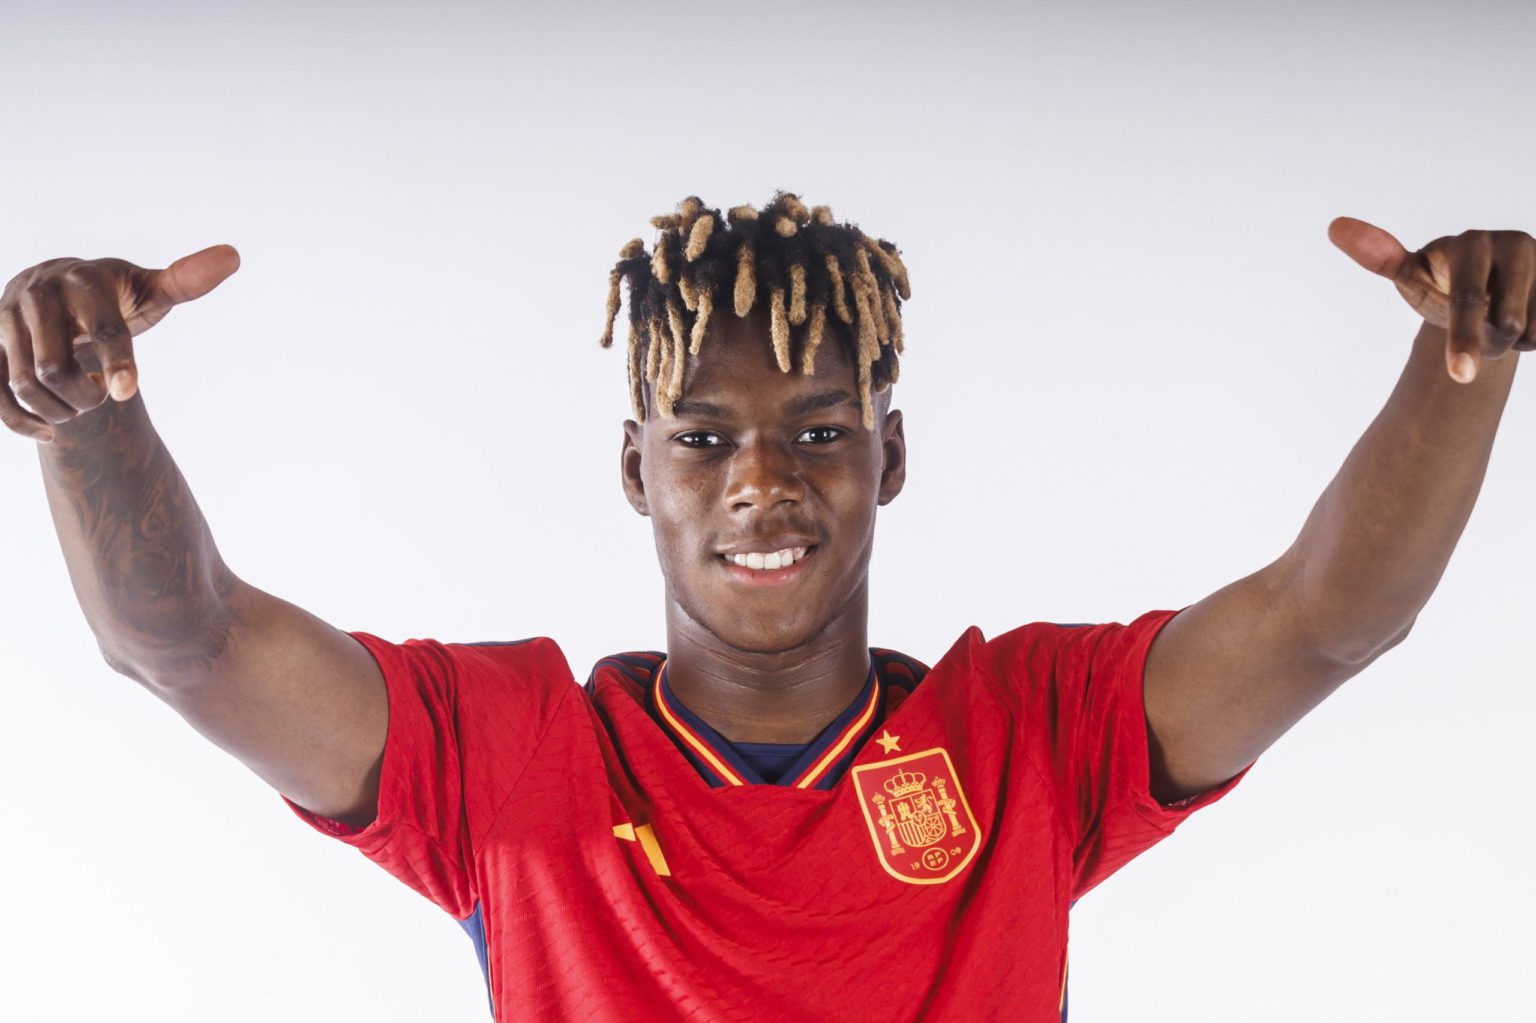  Nico Williams, a Spanish professional footballer who plays as a winger for Athletic Bilbao and the Spain national team, celebrates after scoring a goal during a Euro 2024 match.